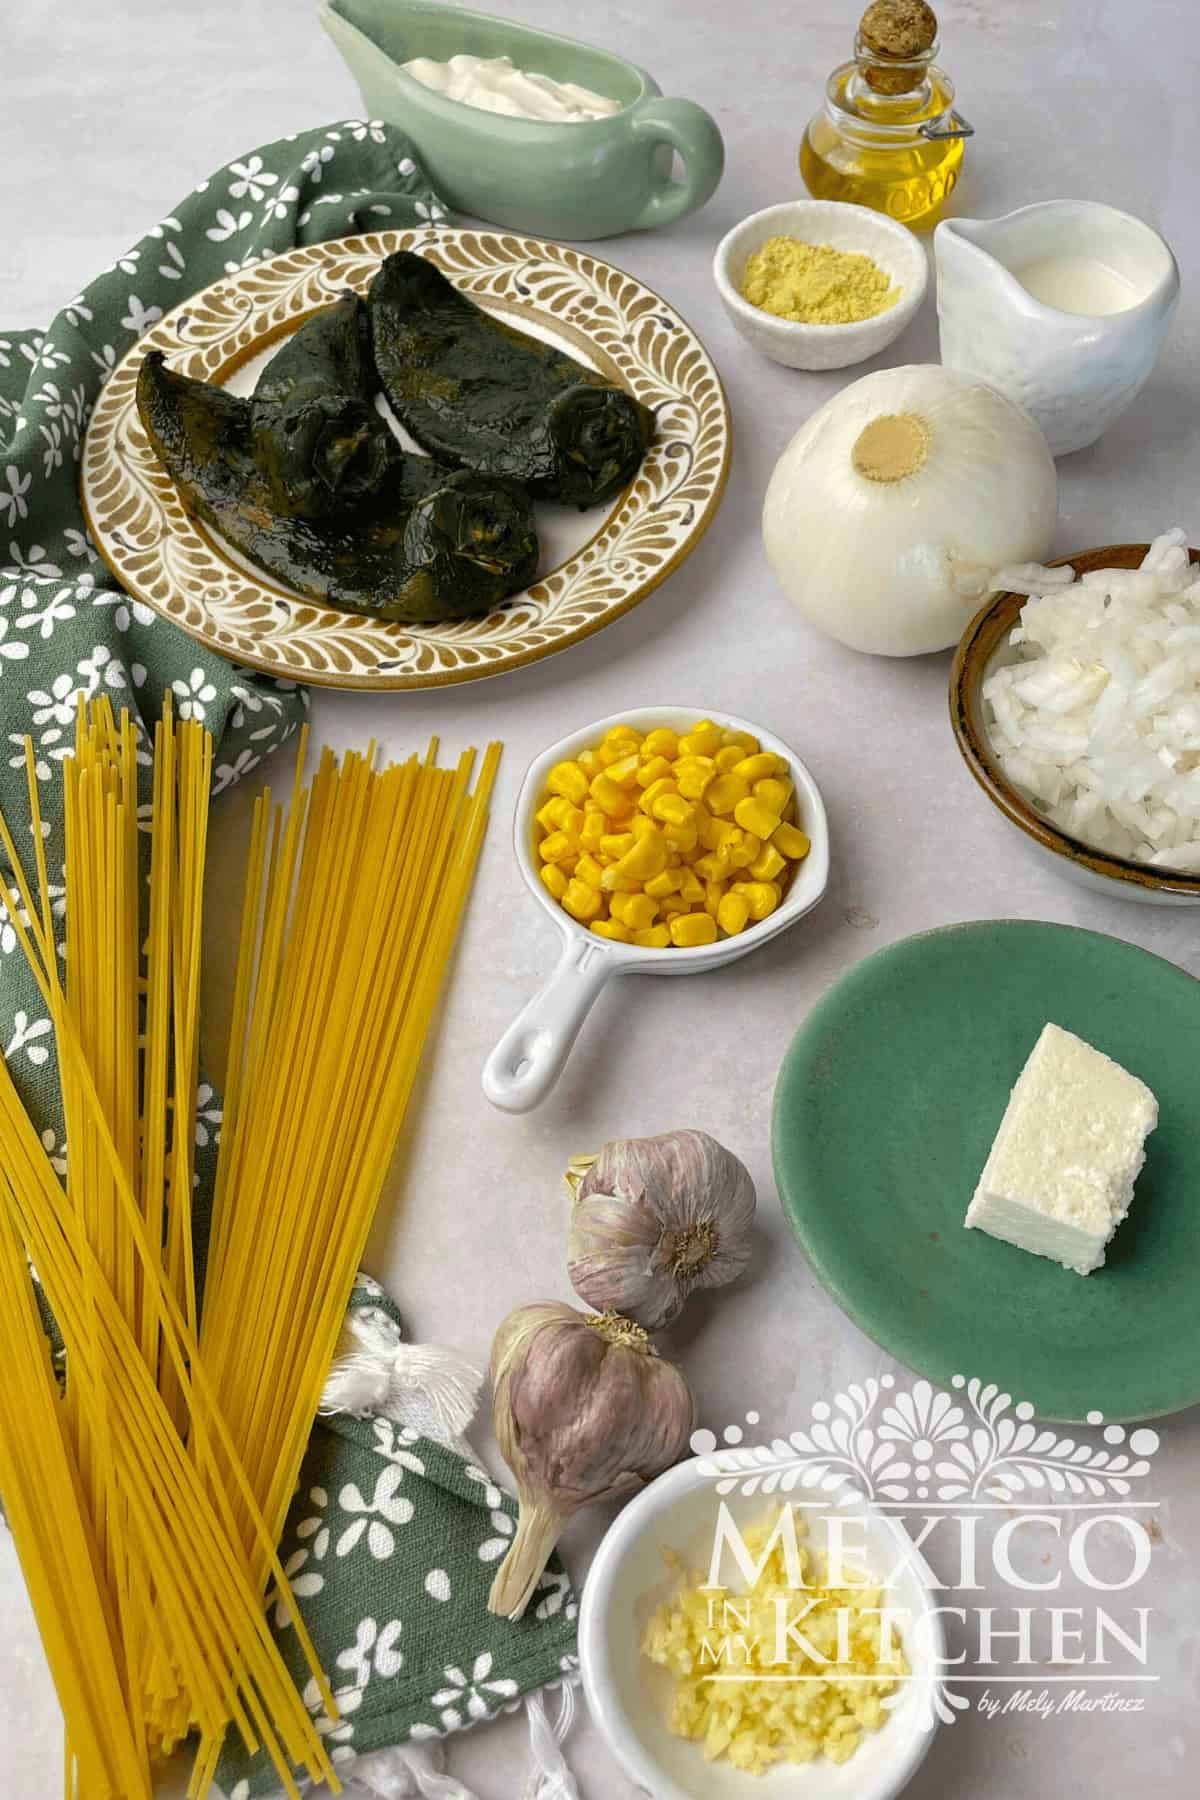 Photo if ingredients like, poblano peppers, spaghetti, Mexican crema and more displayed in a table